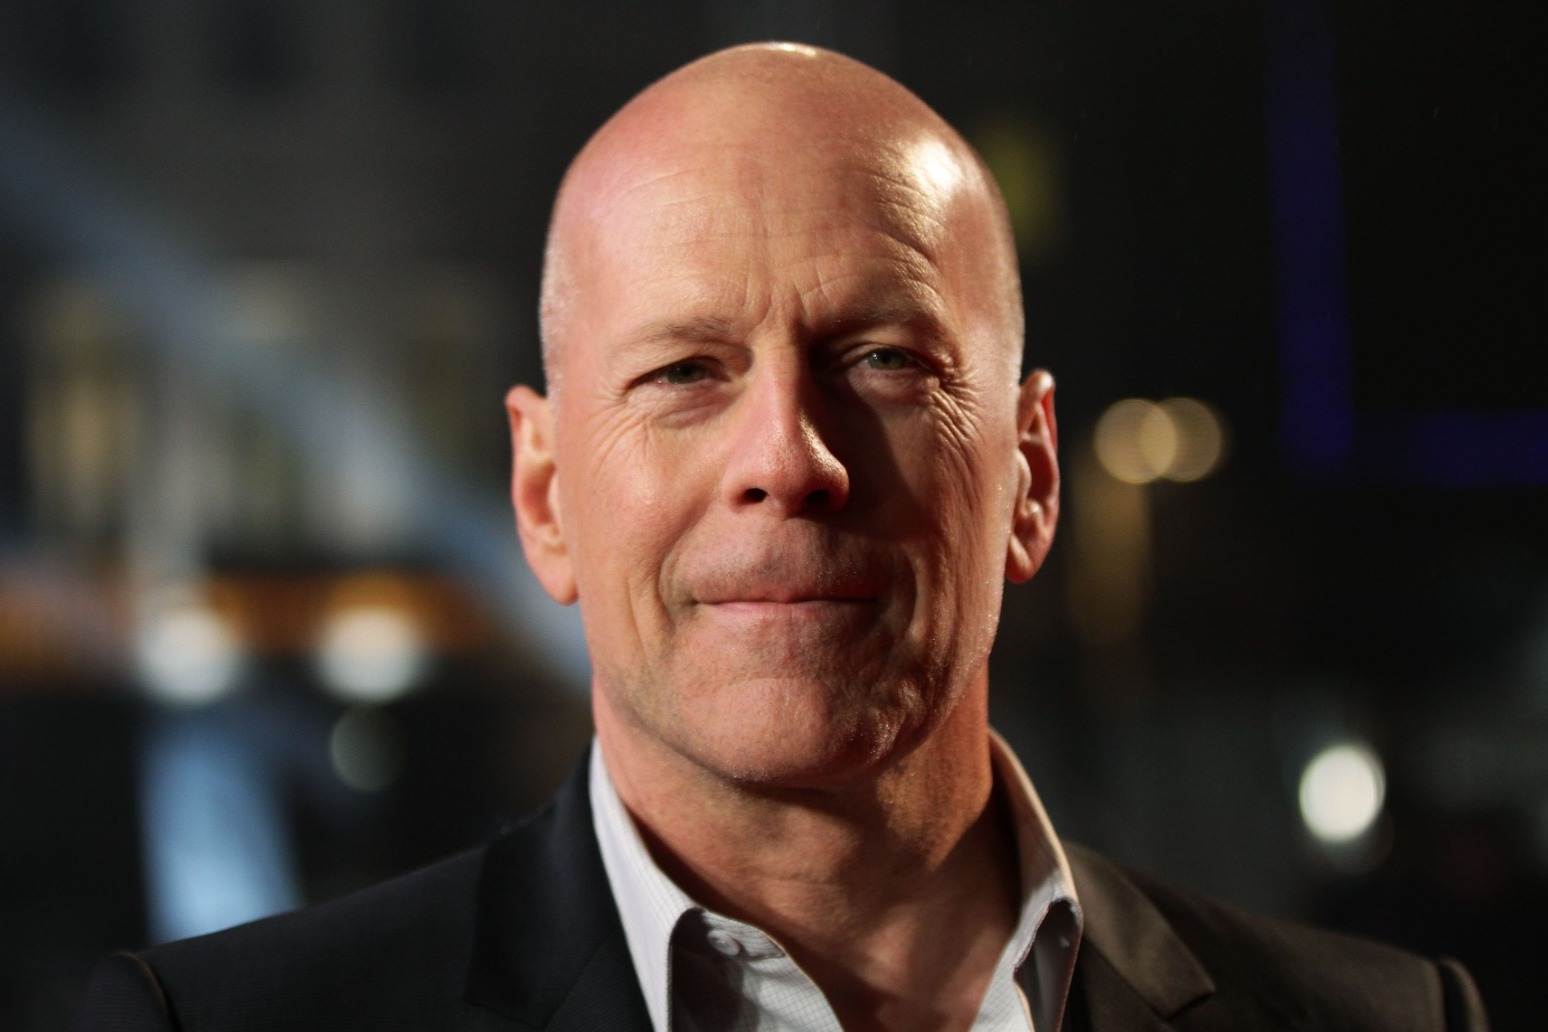 Bruce Willis’s wife says it is ‘hard to know’ if he is aware of his condition